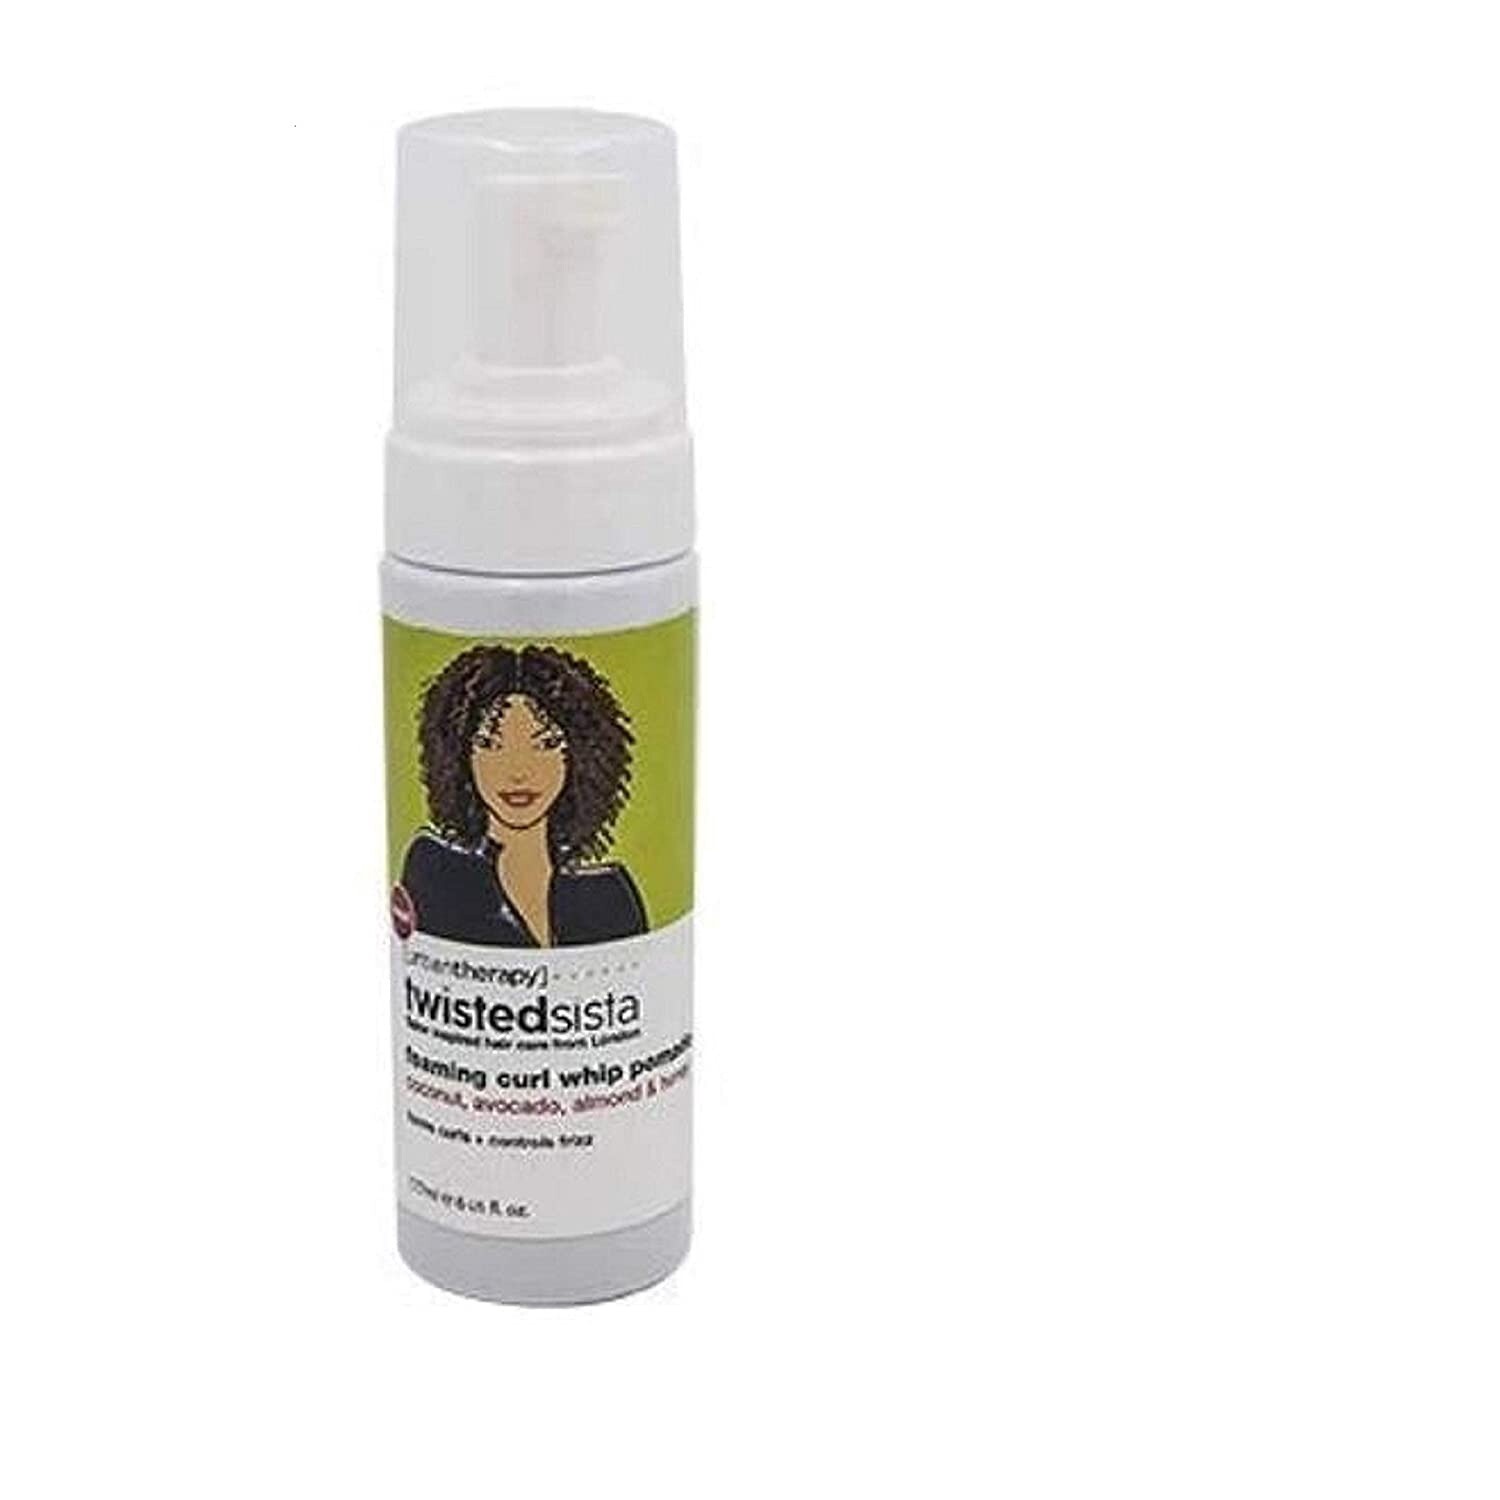 TwistedSista Urban Therapy Foaming Curl Whip Pomade